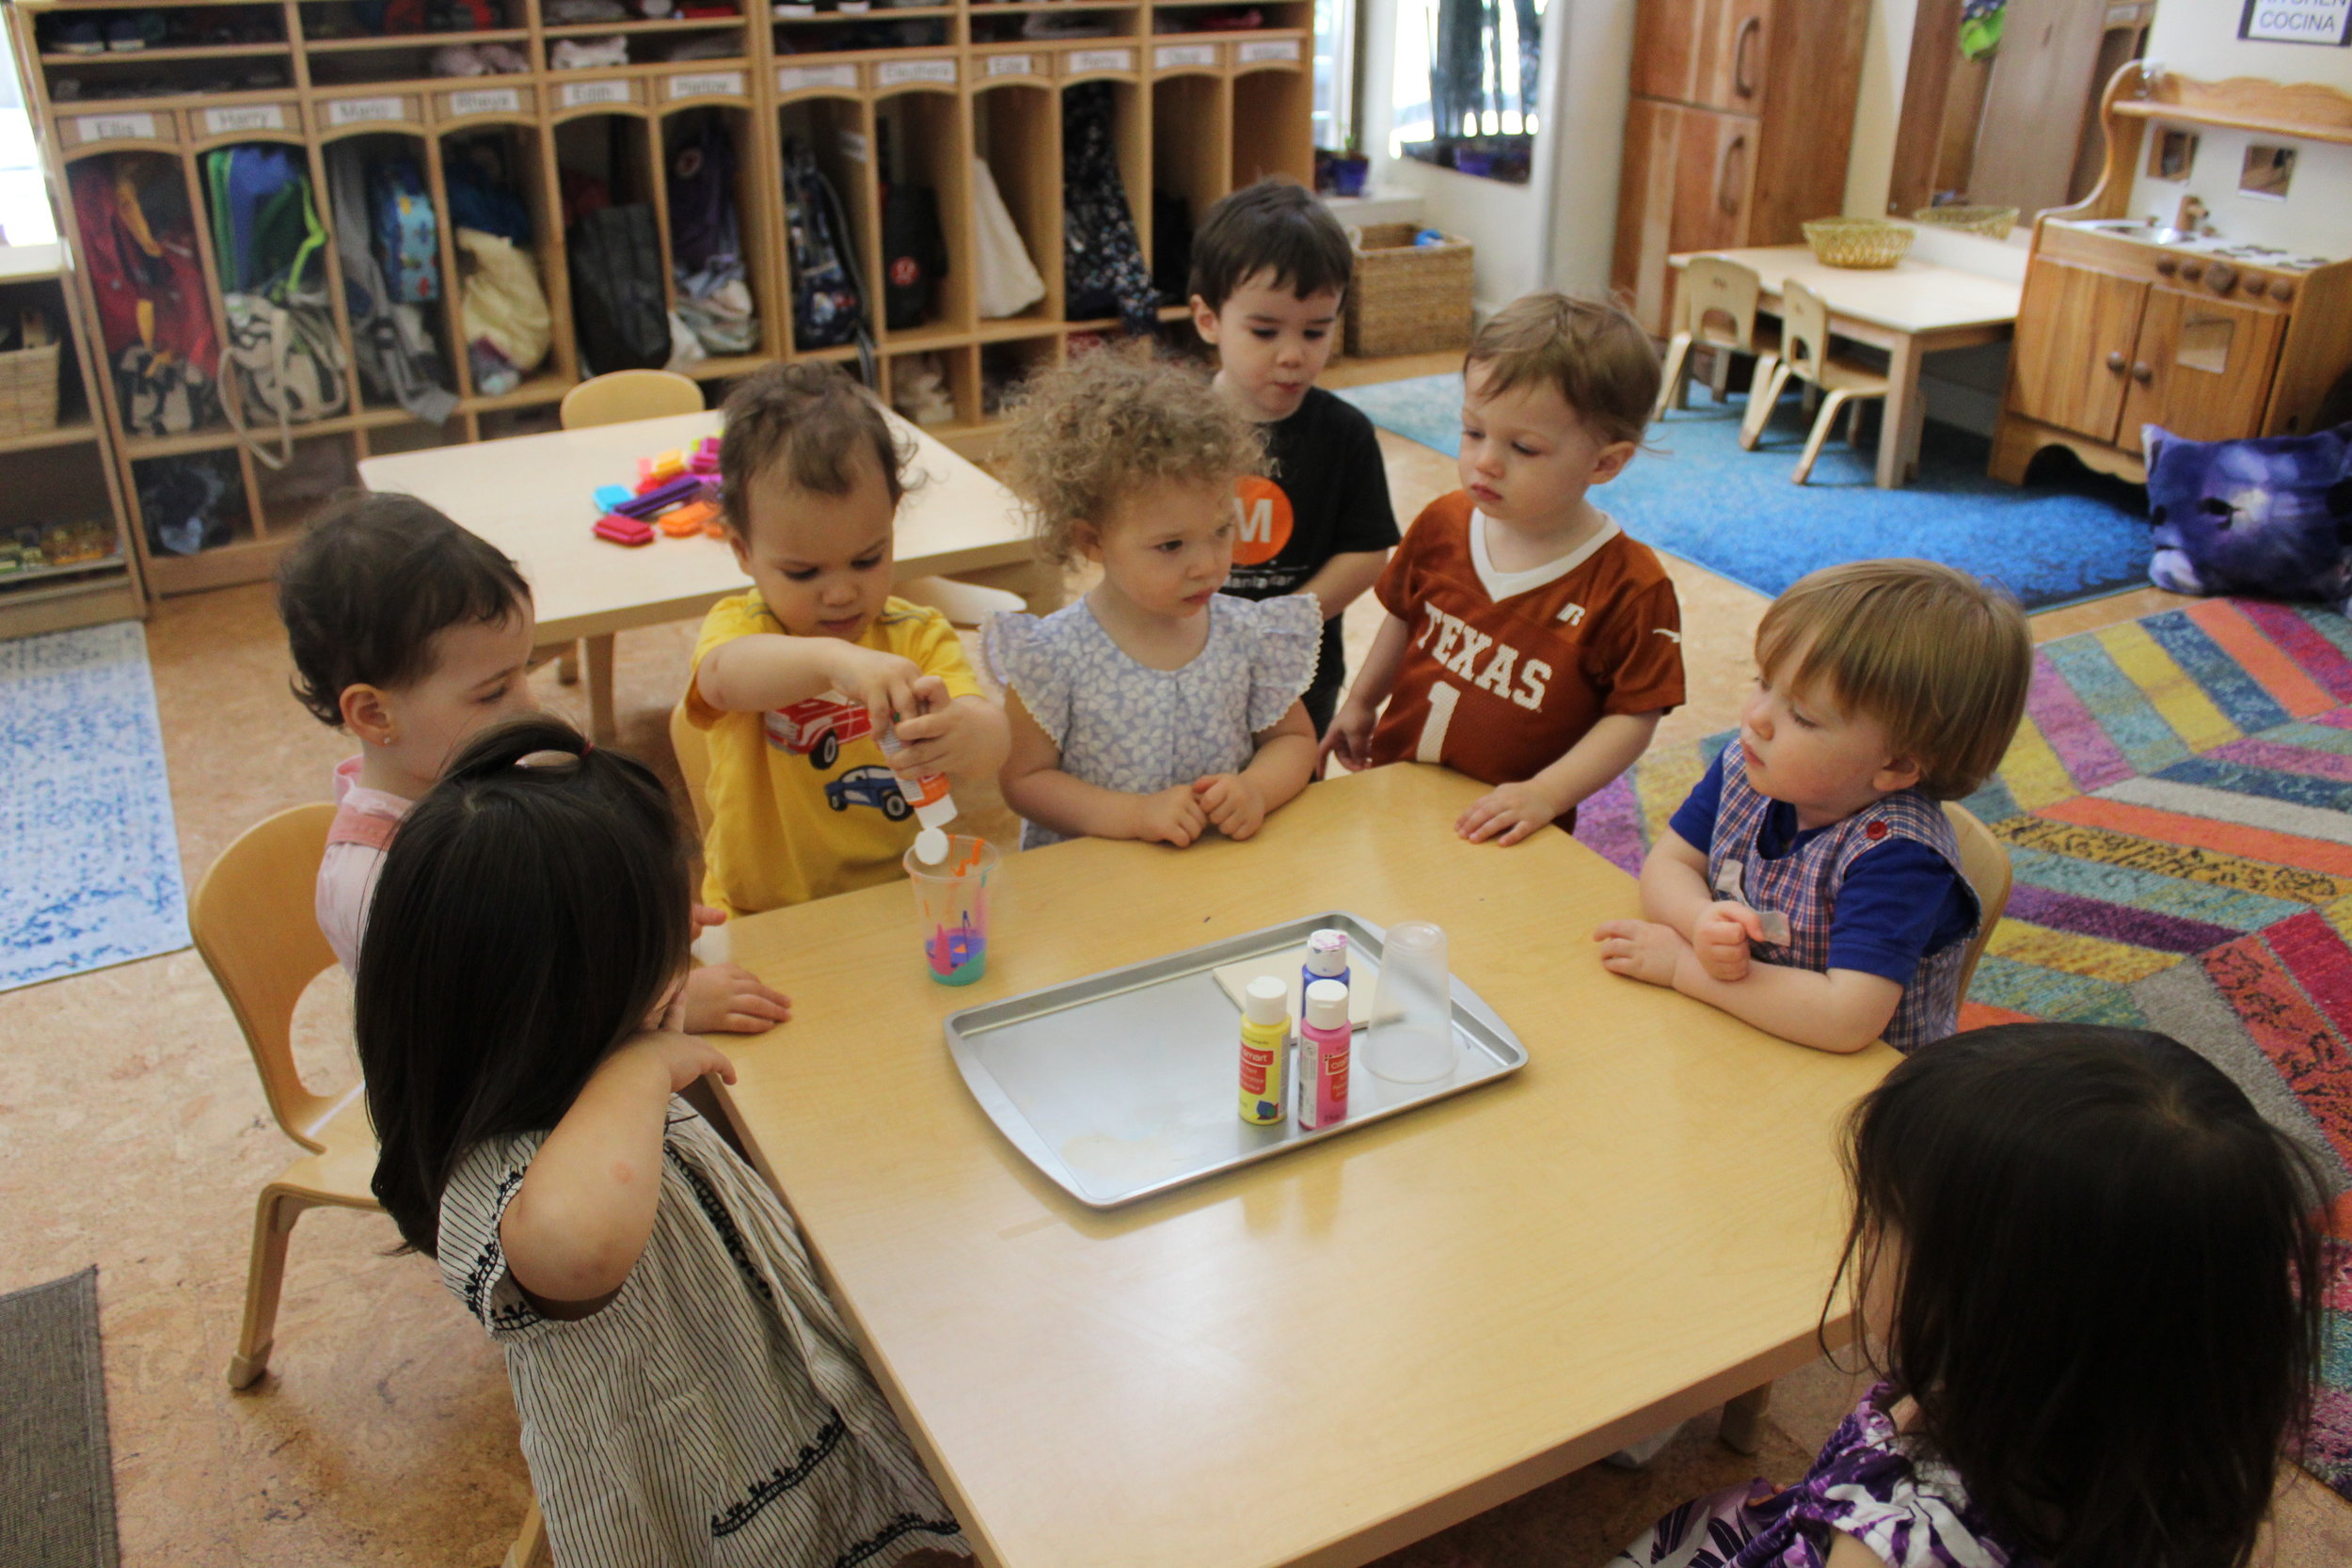  We created more colorful tiles for our Spring Fair. The children appear amazed as they see how the colors they squeezed into the cup without mixing, created a pattern of colors on the tile. Some of the children participated in splattering color on a